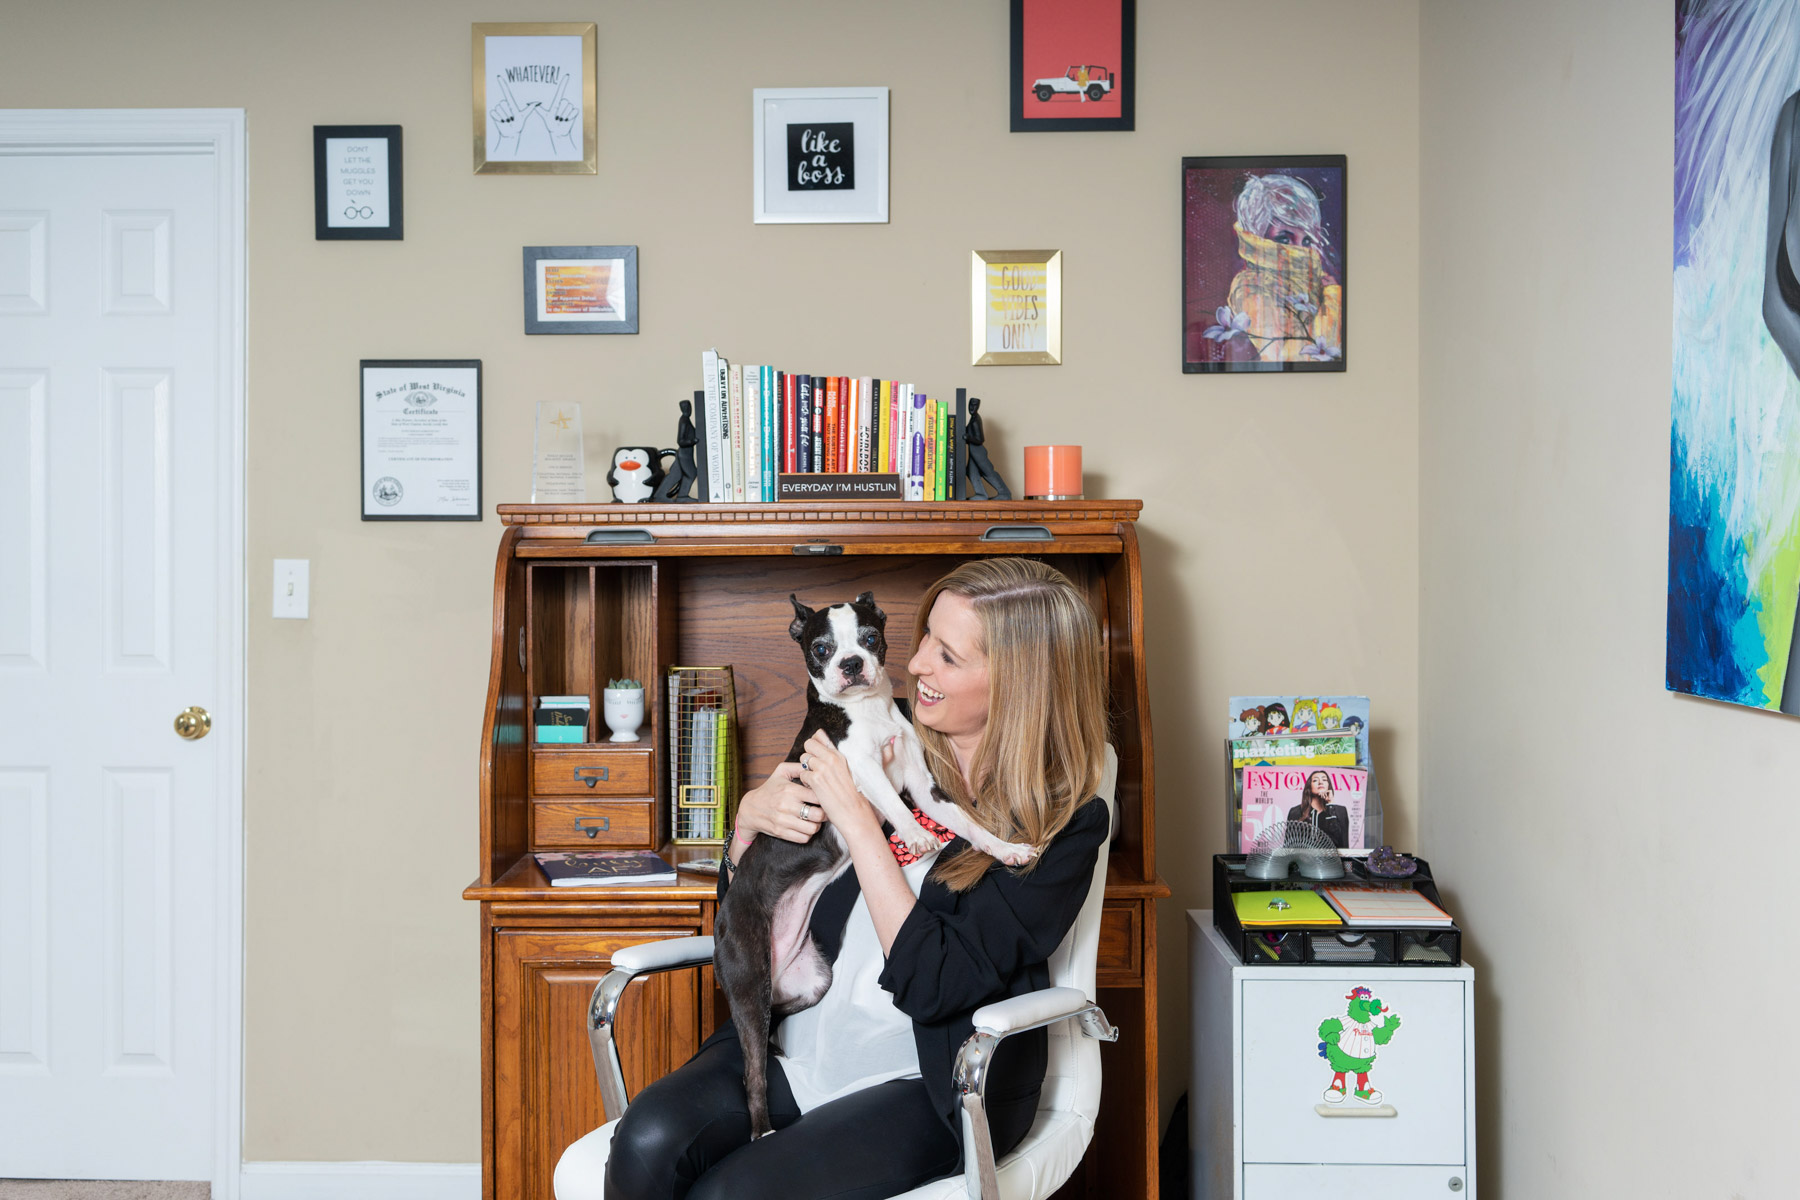 Marketing brand photo of a marketing expert sitting at her desk and holding her dog